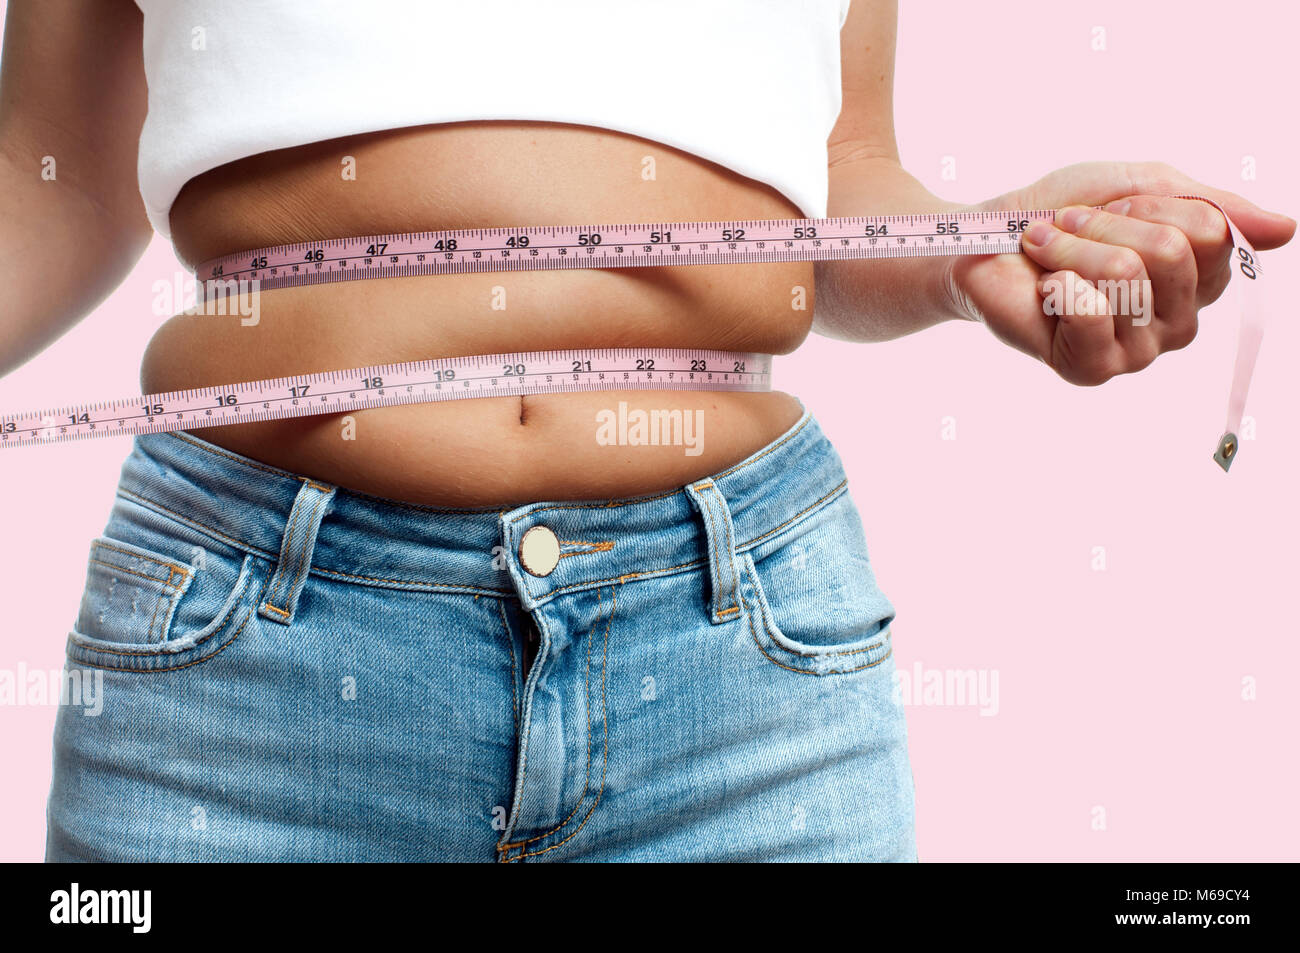 https://c8.alamy.com/comp/M69CY4/overweight-woman-with-tape-measure-around-waist-on-pastel-pink-background-M69CY4.jpg